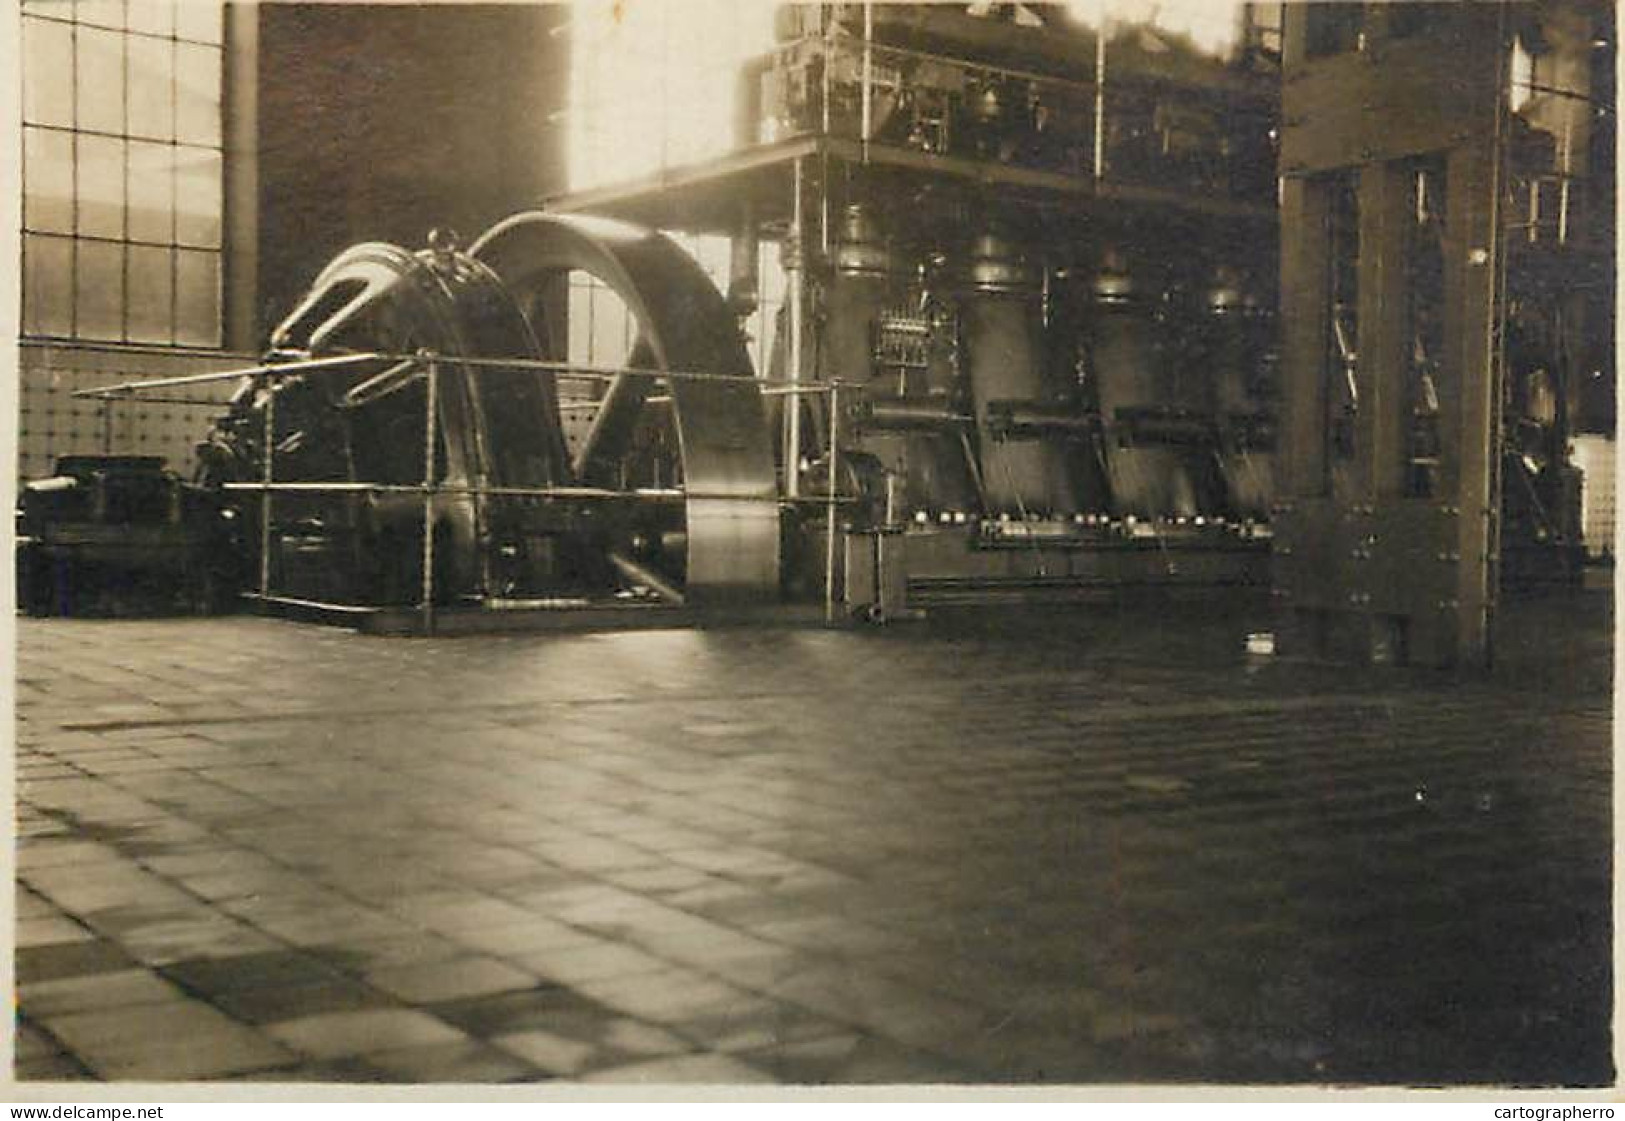 Electric Power Plant Interior Targu Mures Romania Photo 1930s - Objects